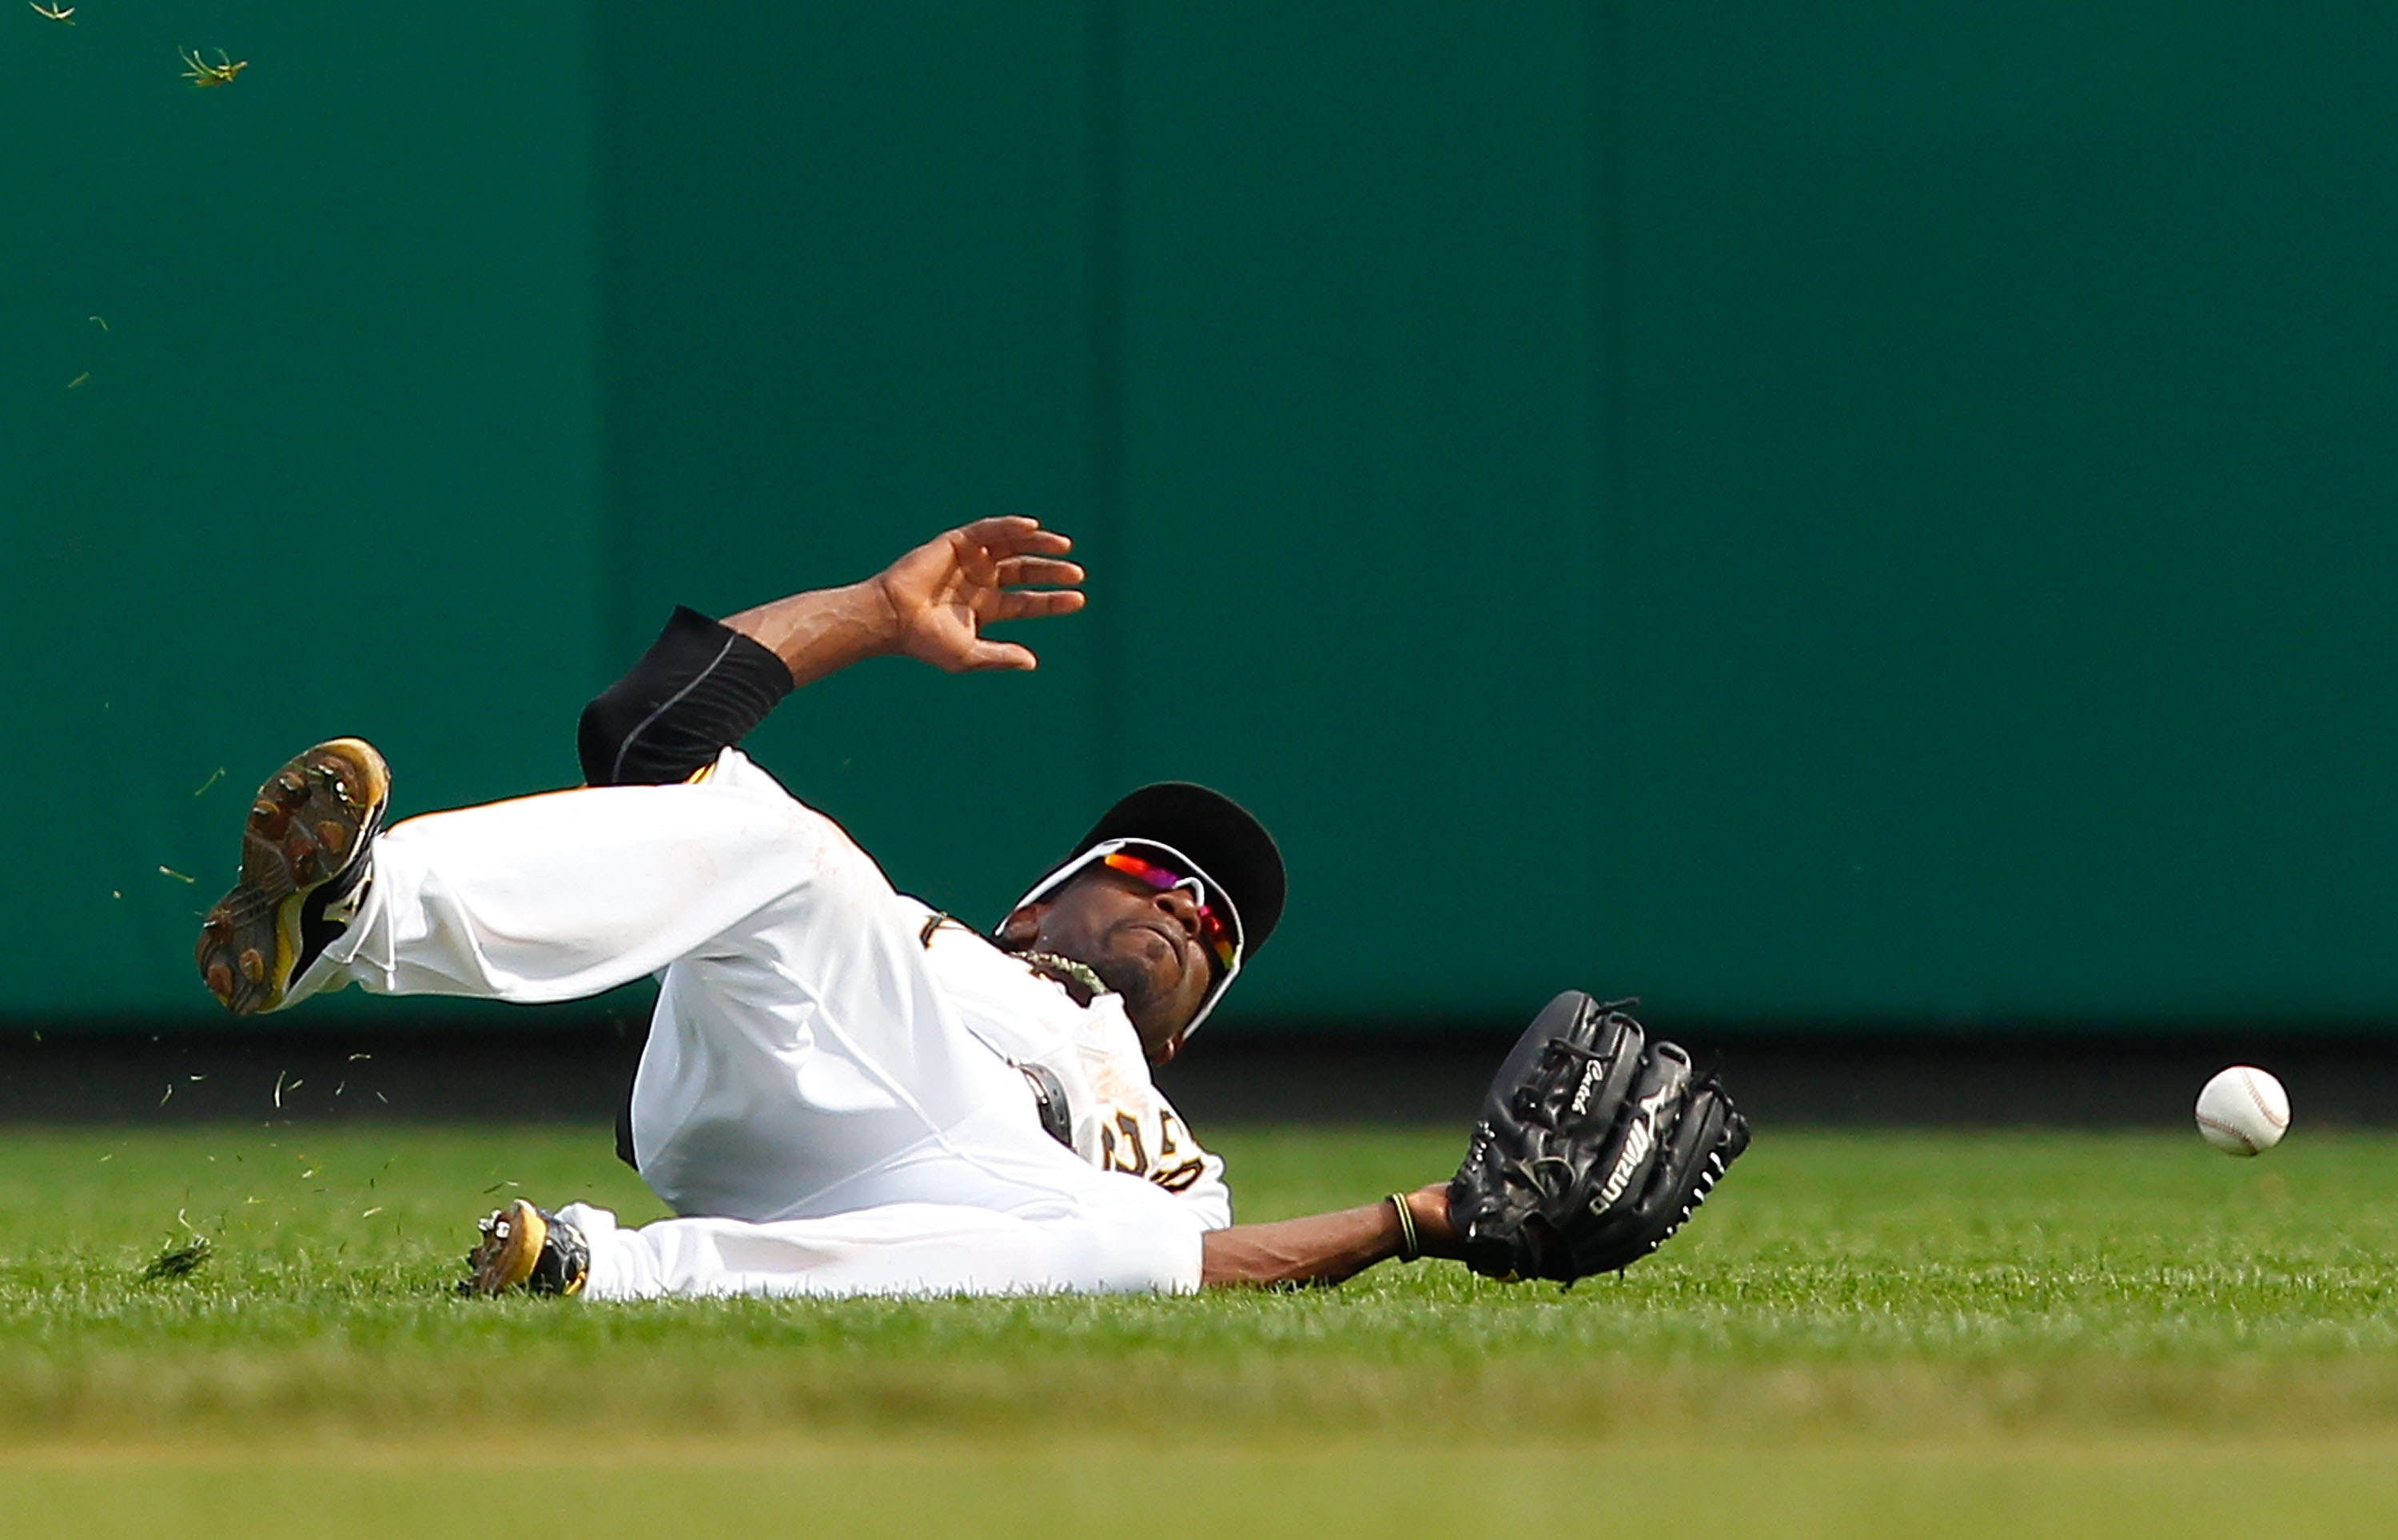 PITTSBURGH - SEPTEMBER 23:  Andrew McCutchen #22 of the Pittsburgh Pirates misses a fly ball in the outfield during the game against the St Louis Cardinals on September 23, 2010 at PNC Park in Pittsburgh, Pennsylvania.  (Photo by Jared Wickerham/Getty Ima